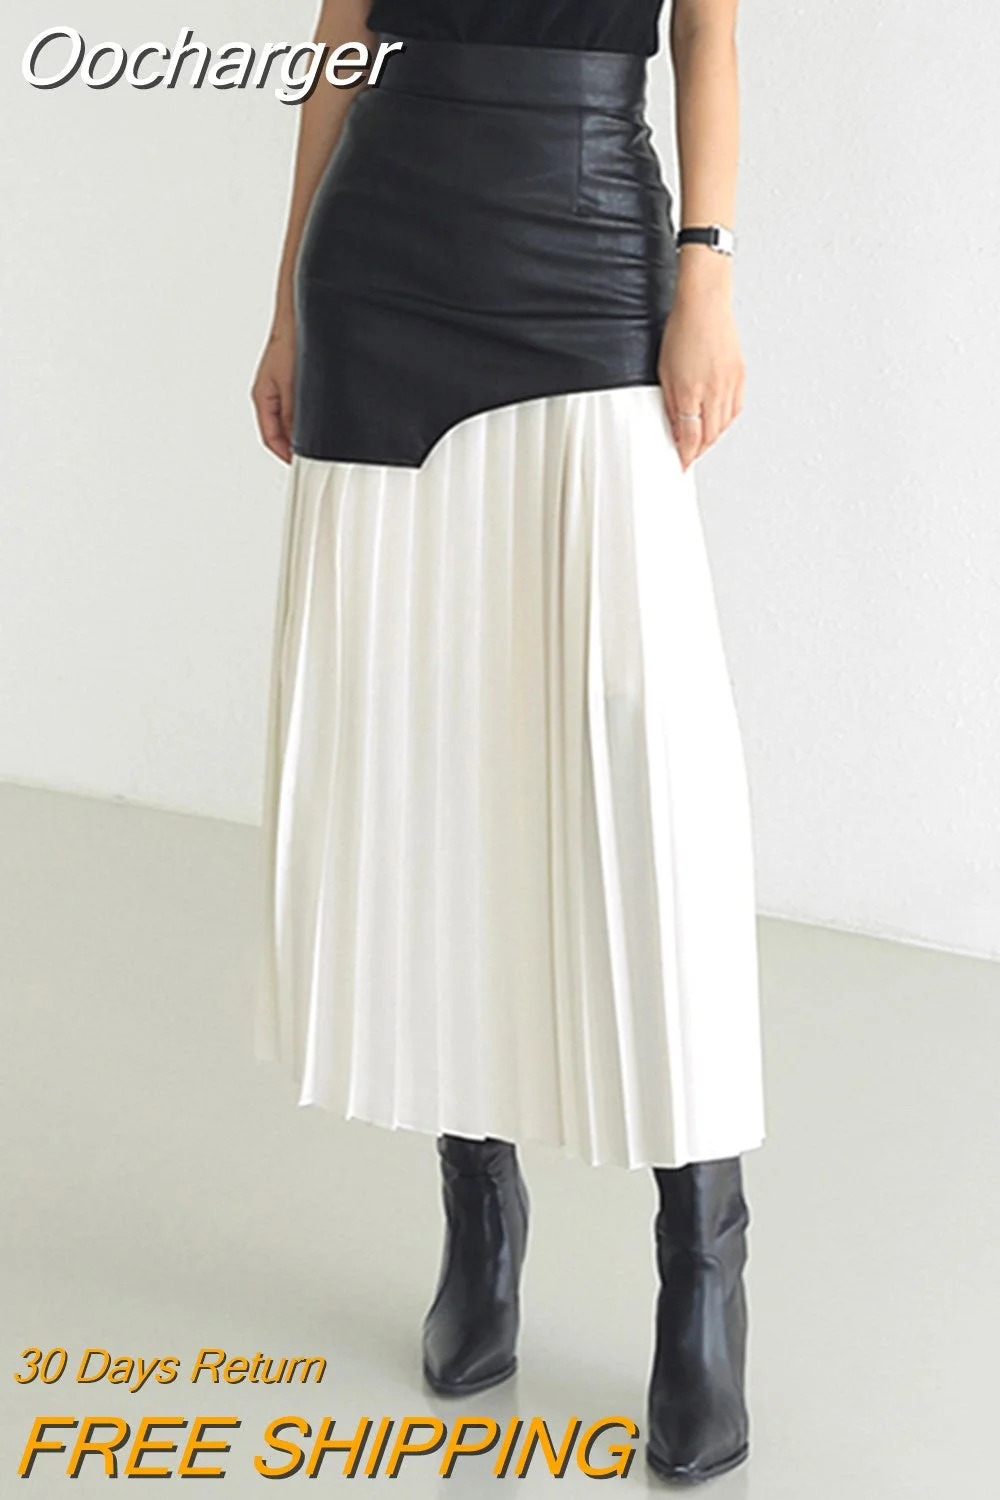 Oocharger Casual Patchwork Pu Skirt For Women High Waist Midi Folds Pleated Skirts Female 2023 Spring Fashion Clothing Style